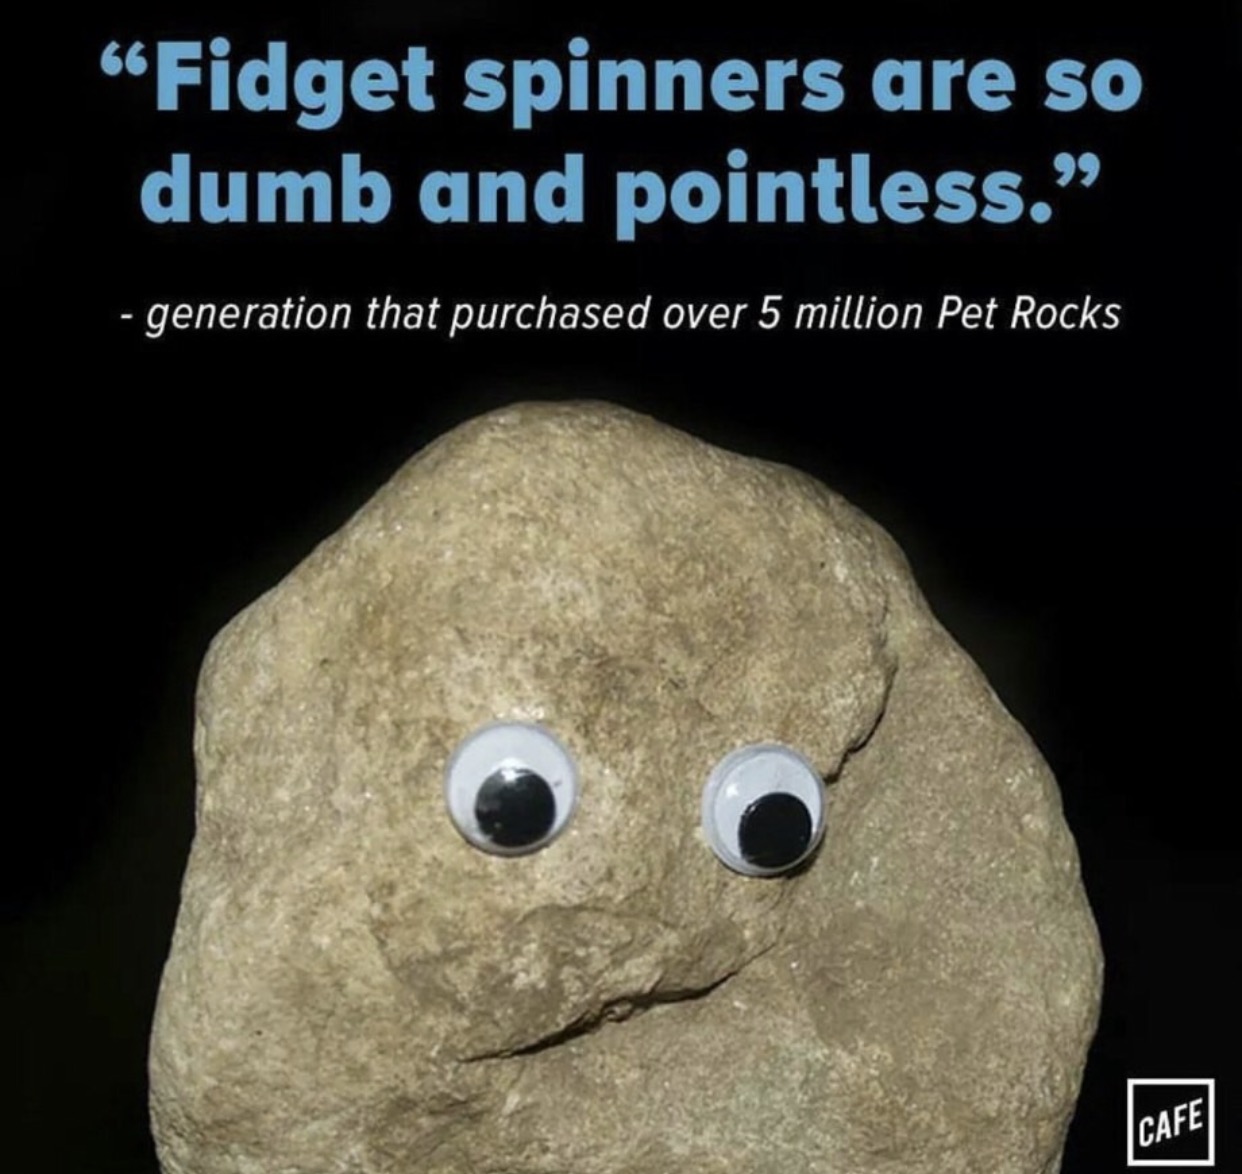 rock - Fidget spinners are so dumb and pointless." generation that purchased over 5 million Pet Rocks Cafe